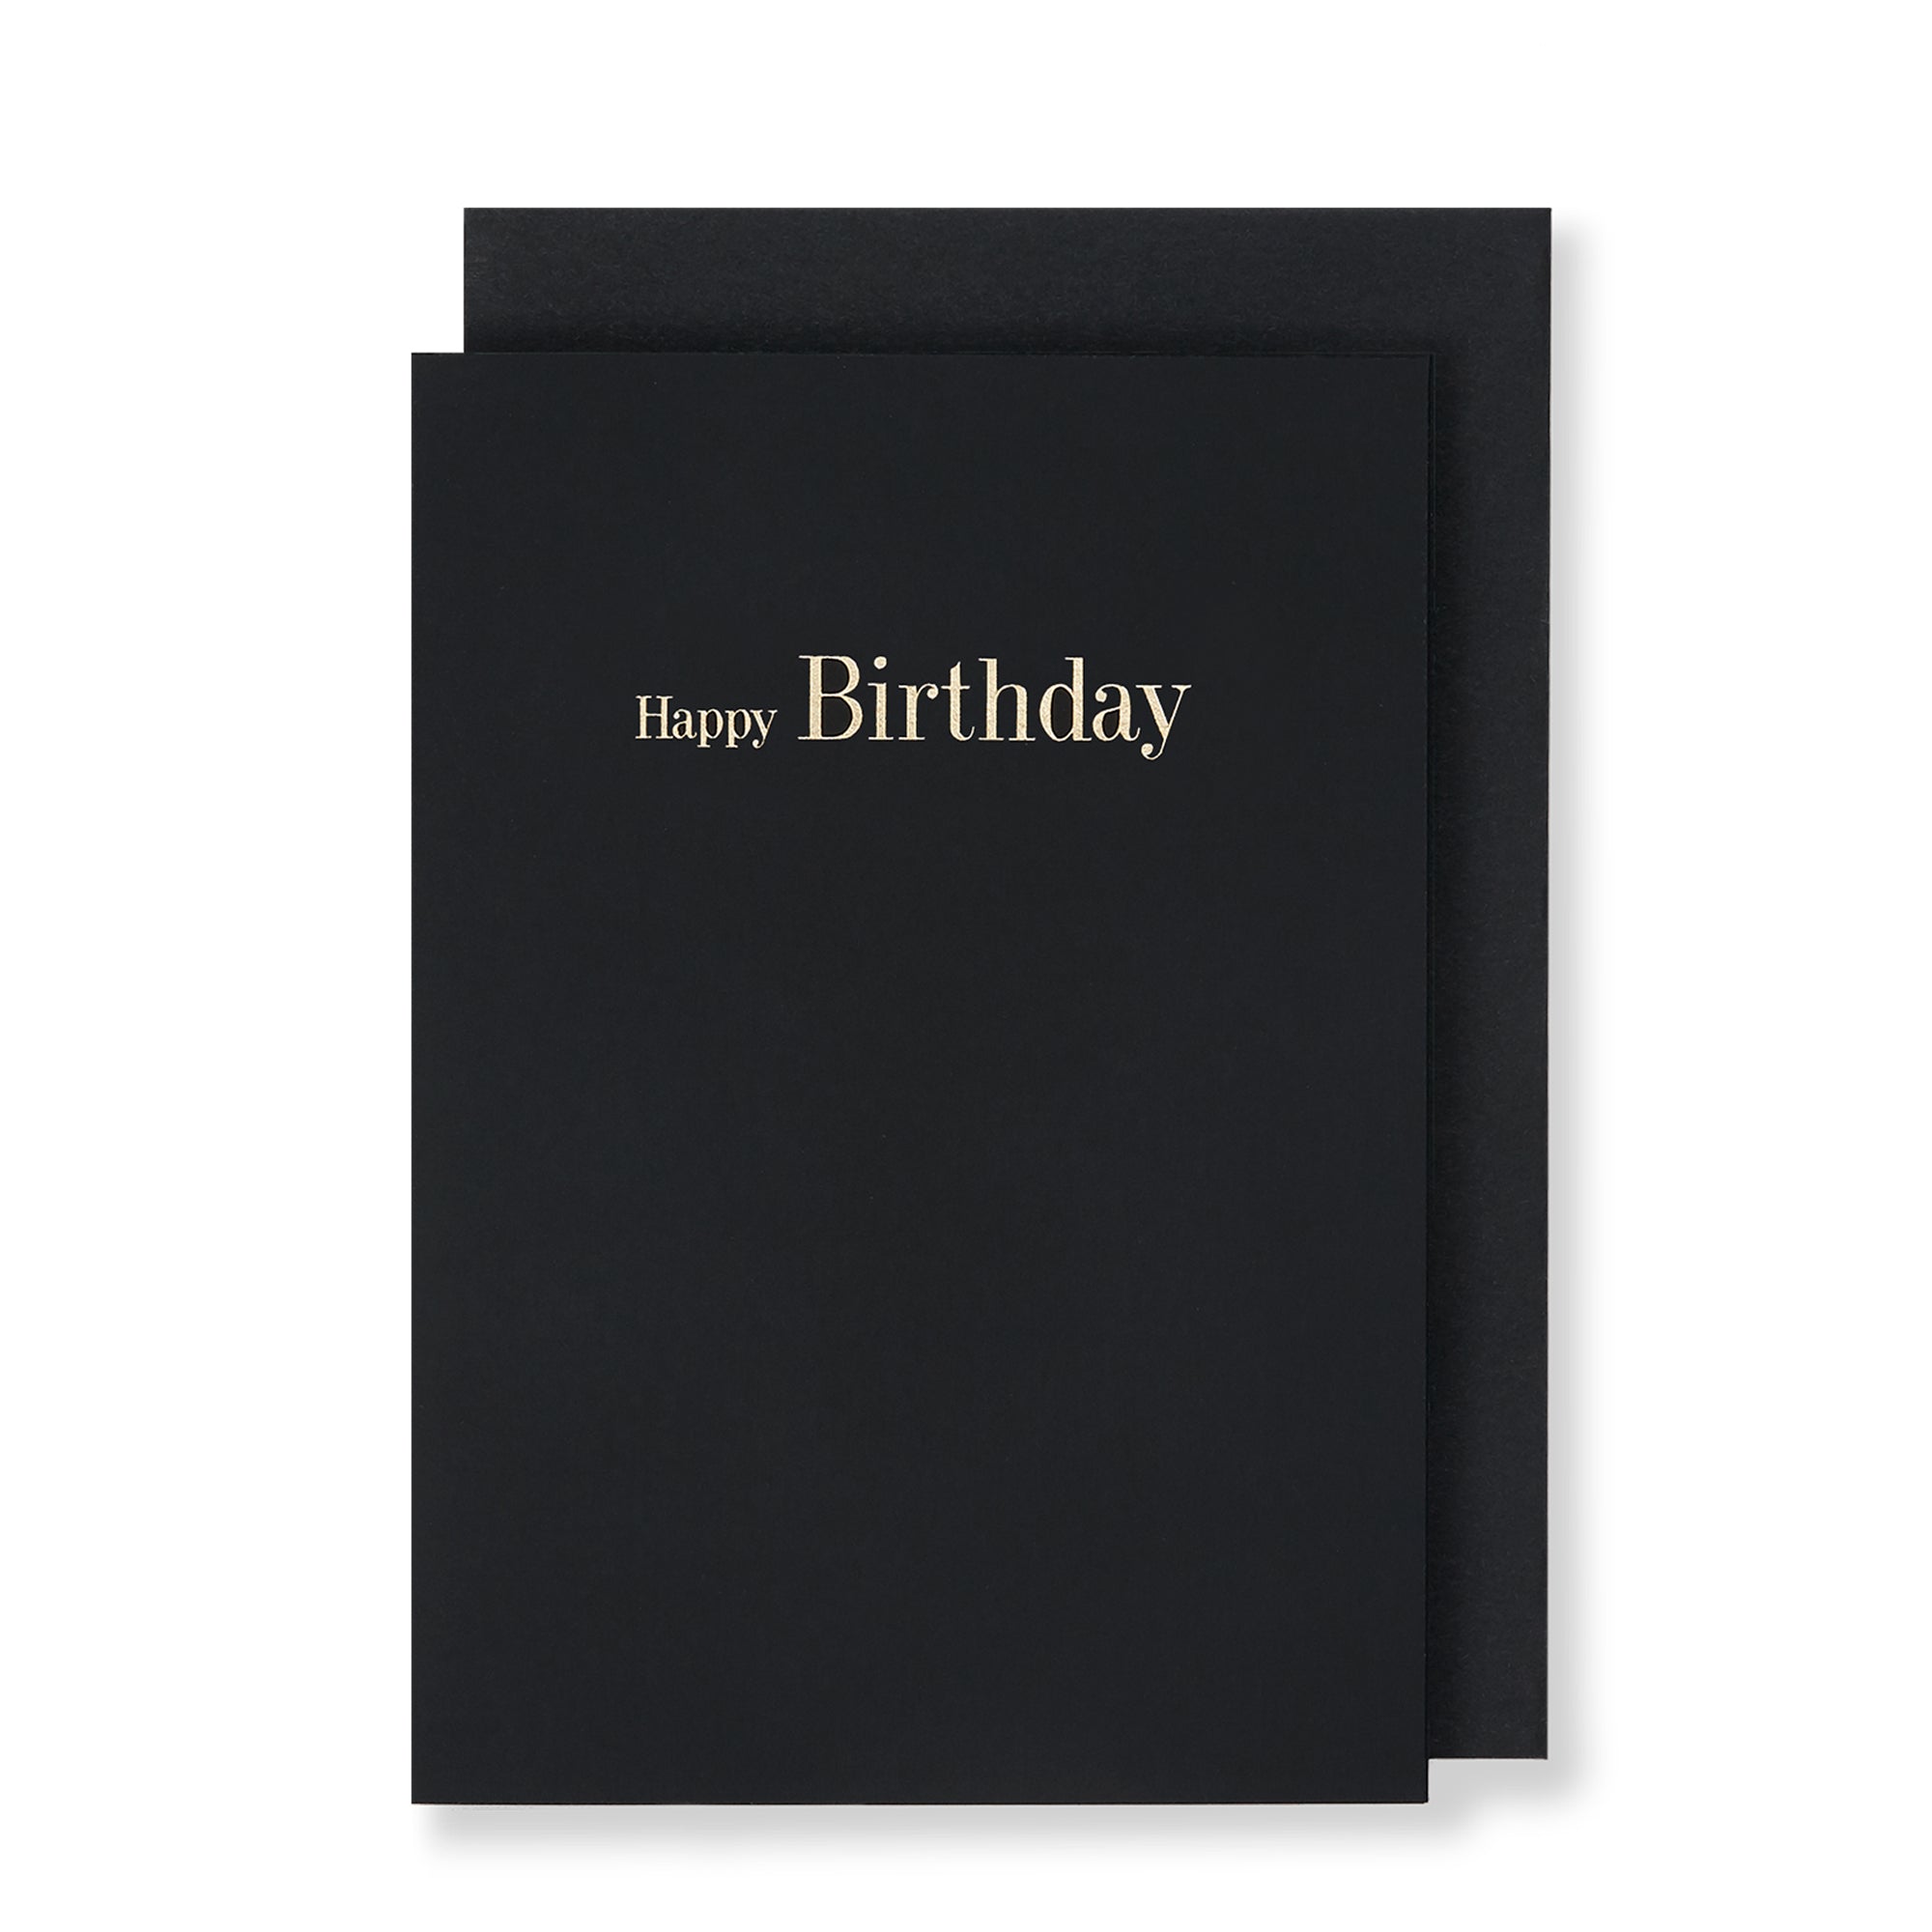 Happy Birthday Greeting Card in Black, Front